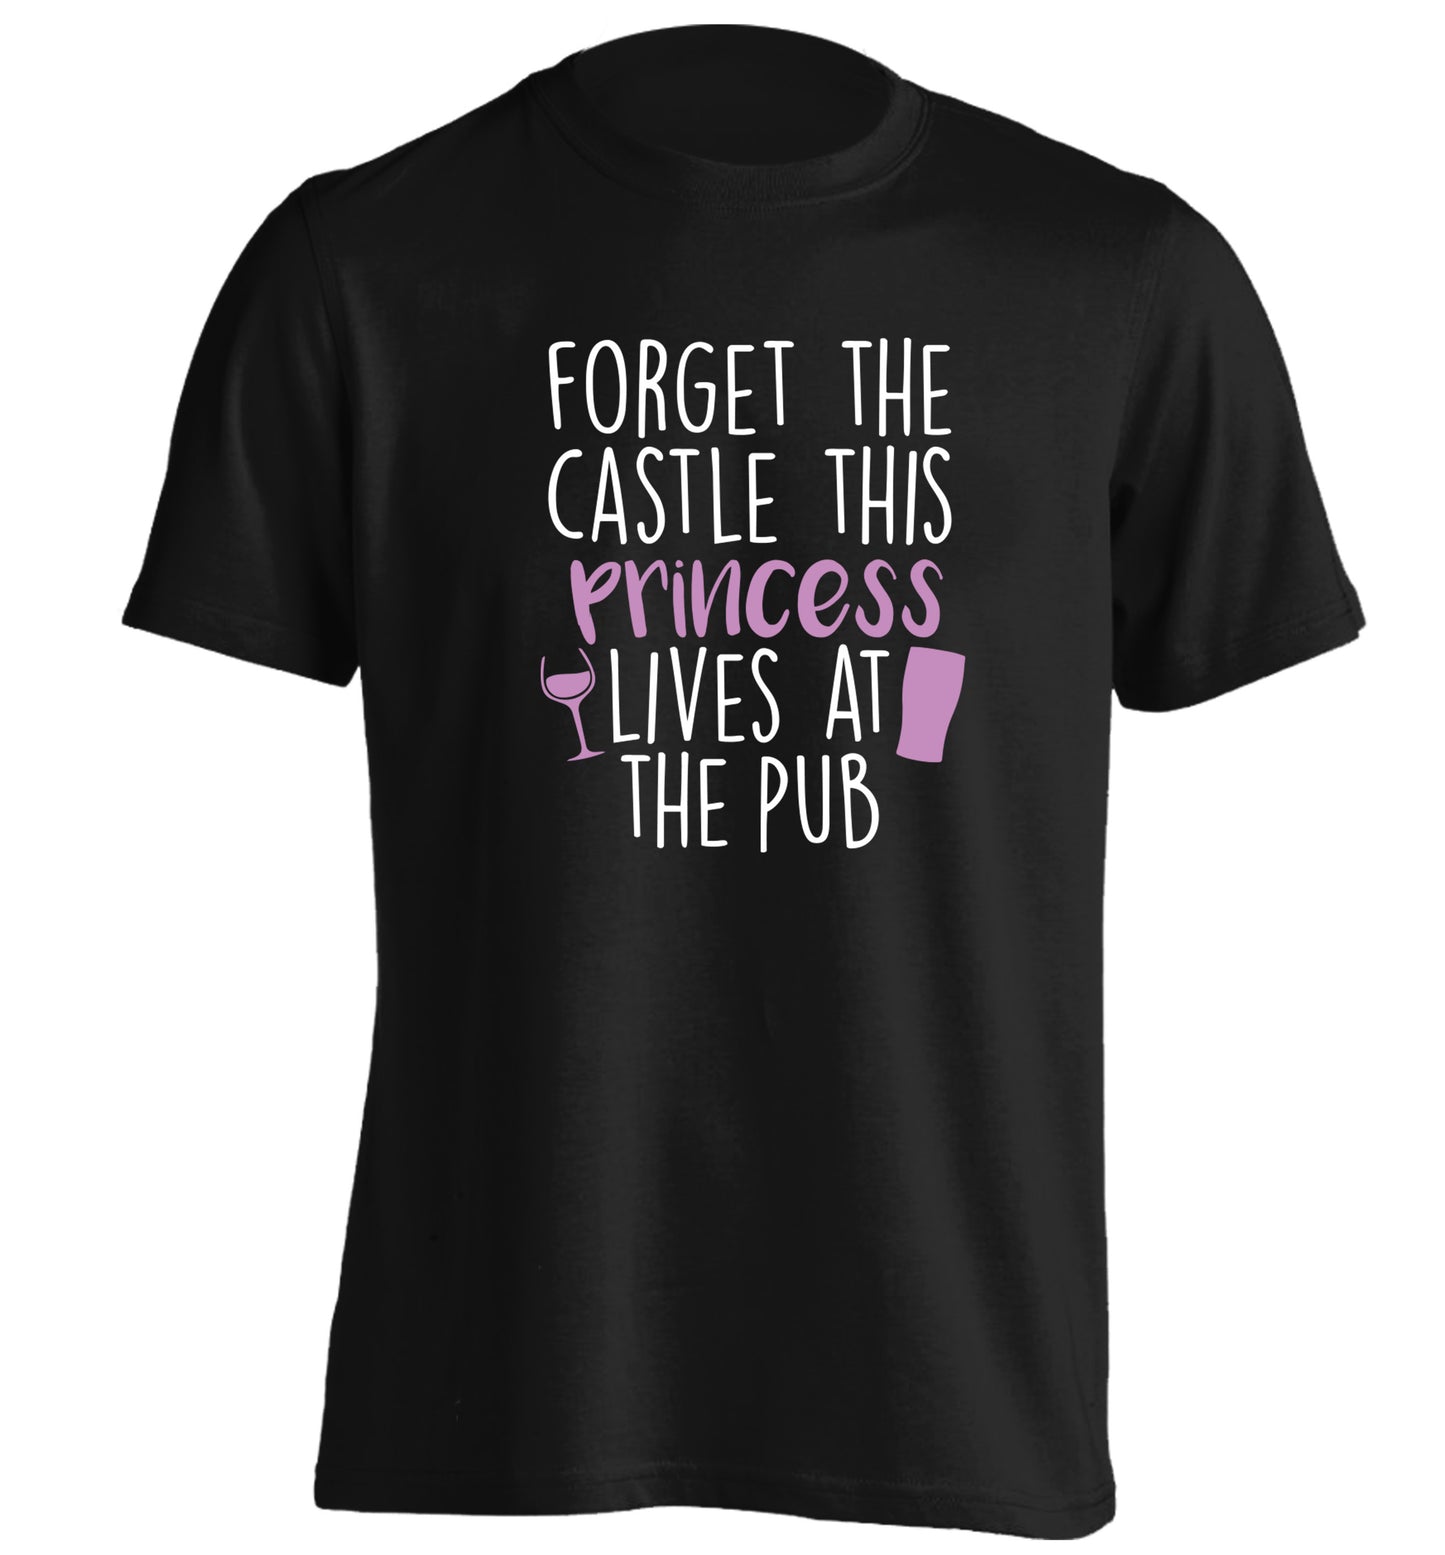 Forget the castle this princess lives at the pub adults unisex black Tshirt 2XL